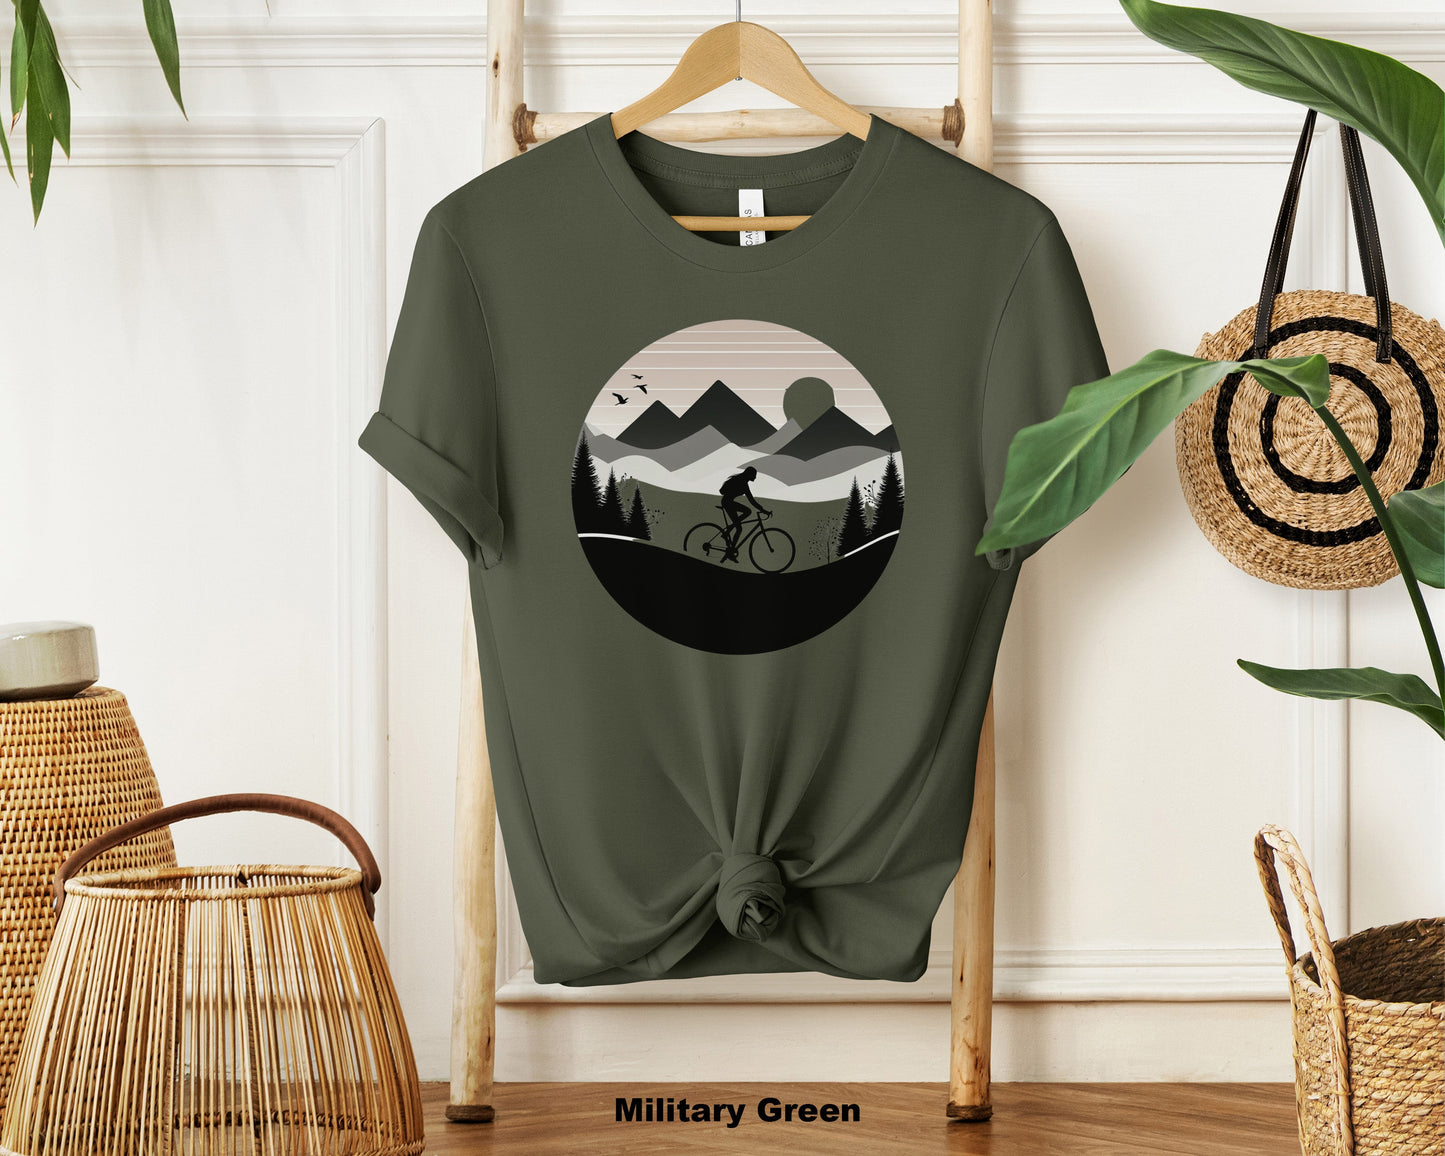 "Mountain Biking Adventure Silhouette Tee - Unisex Cycling T-Shirt for Sports Lovers"